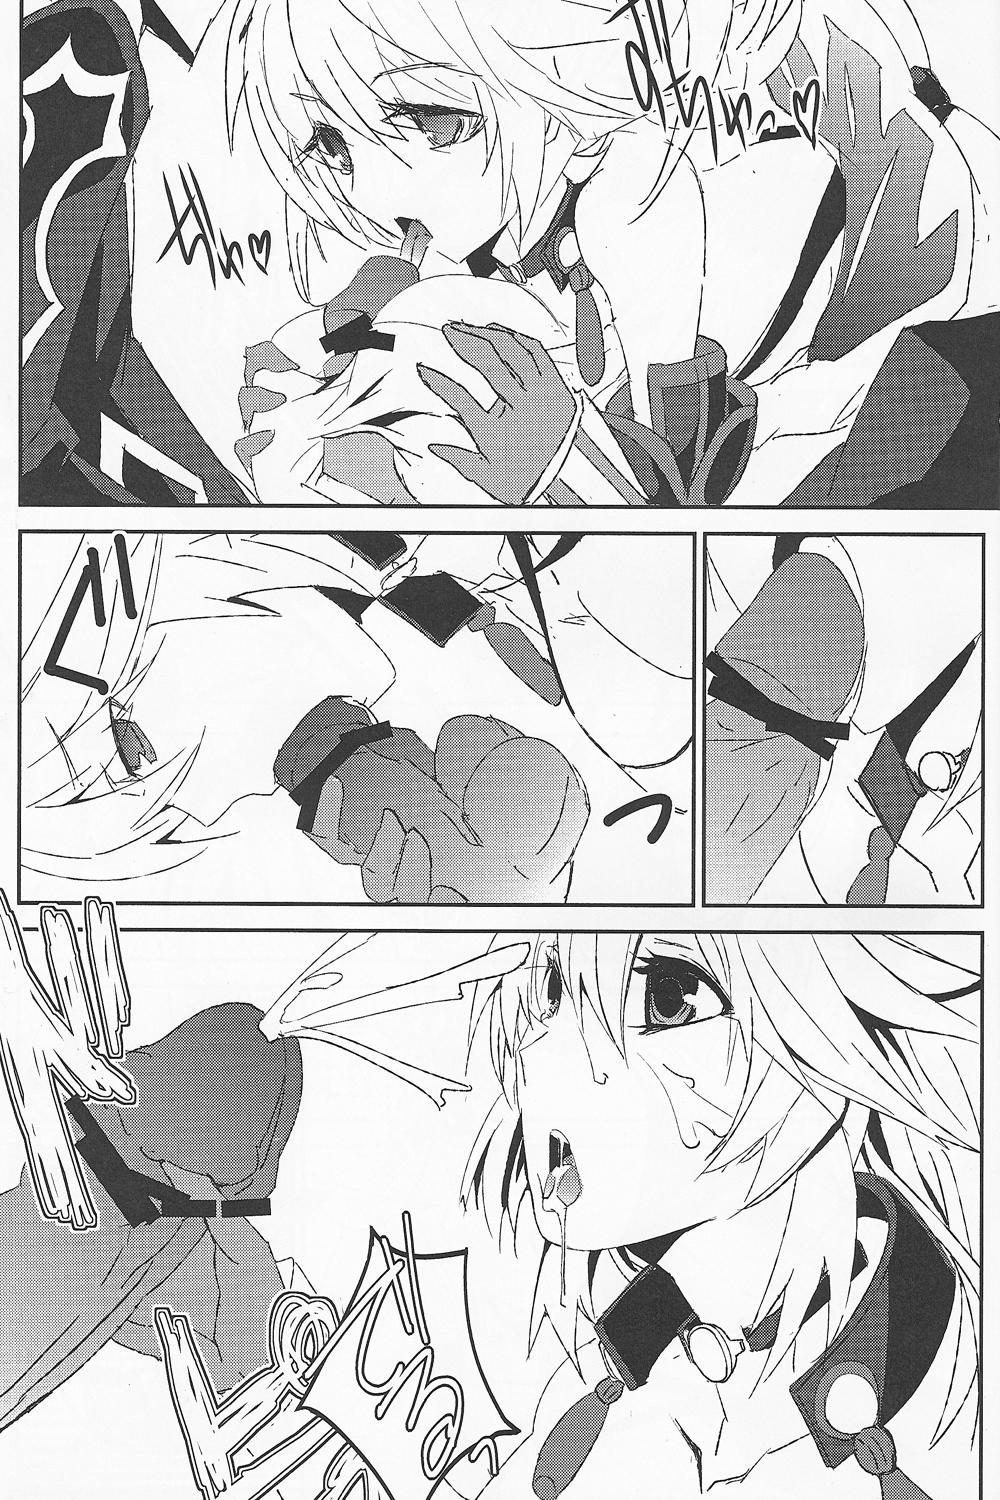 Colombian Locus - Tales of xillia Missionary Porn - Page 4